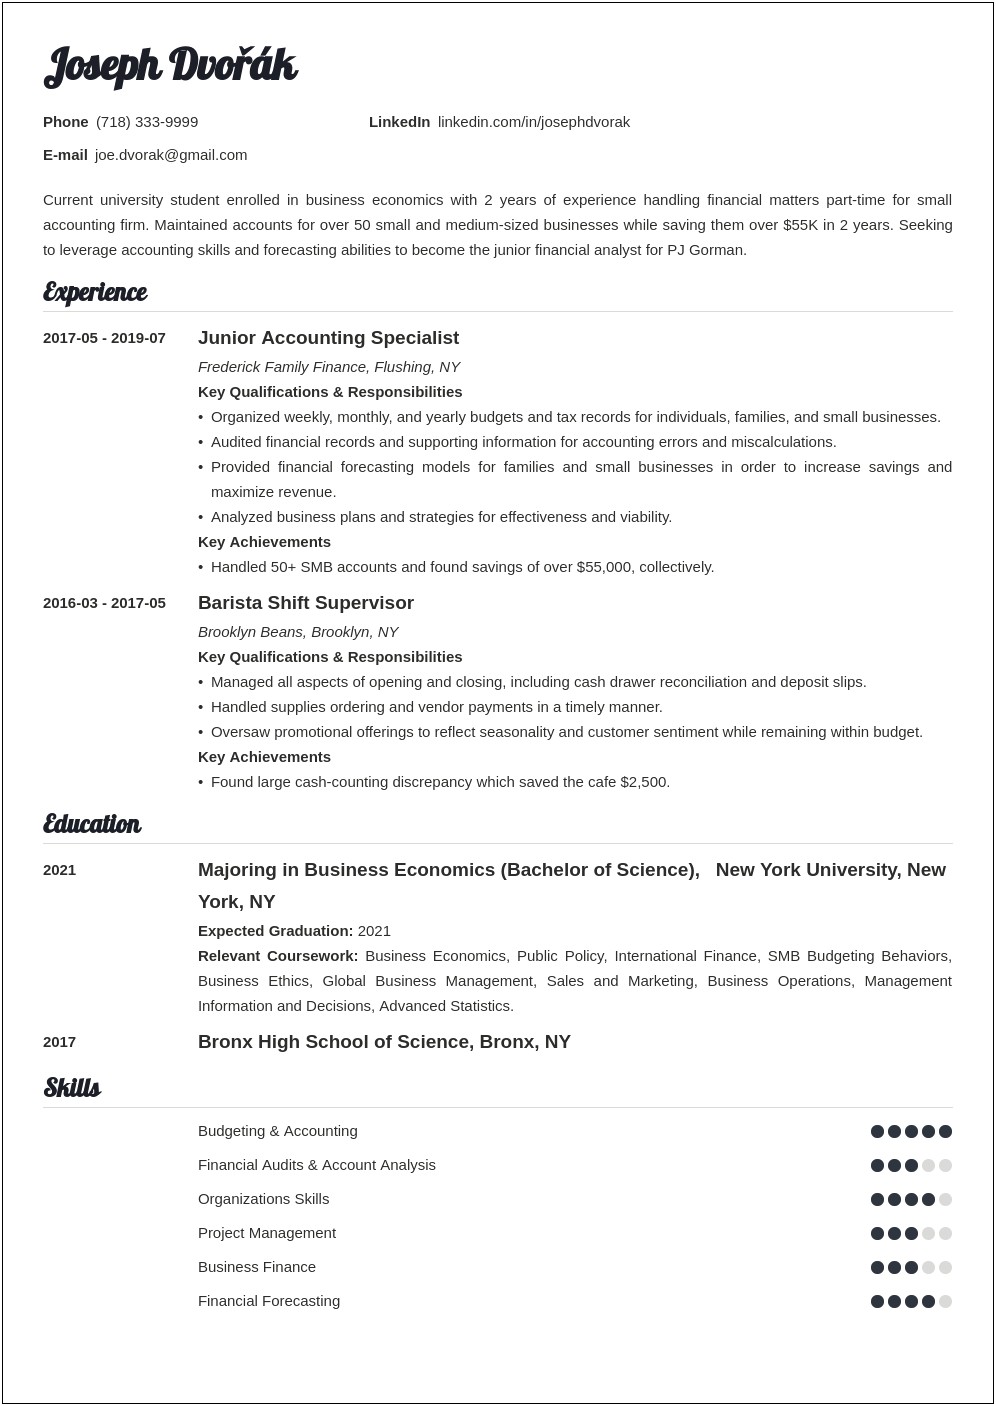 Resume While Working On Second Degree